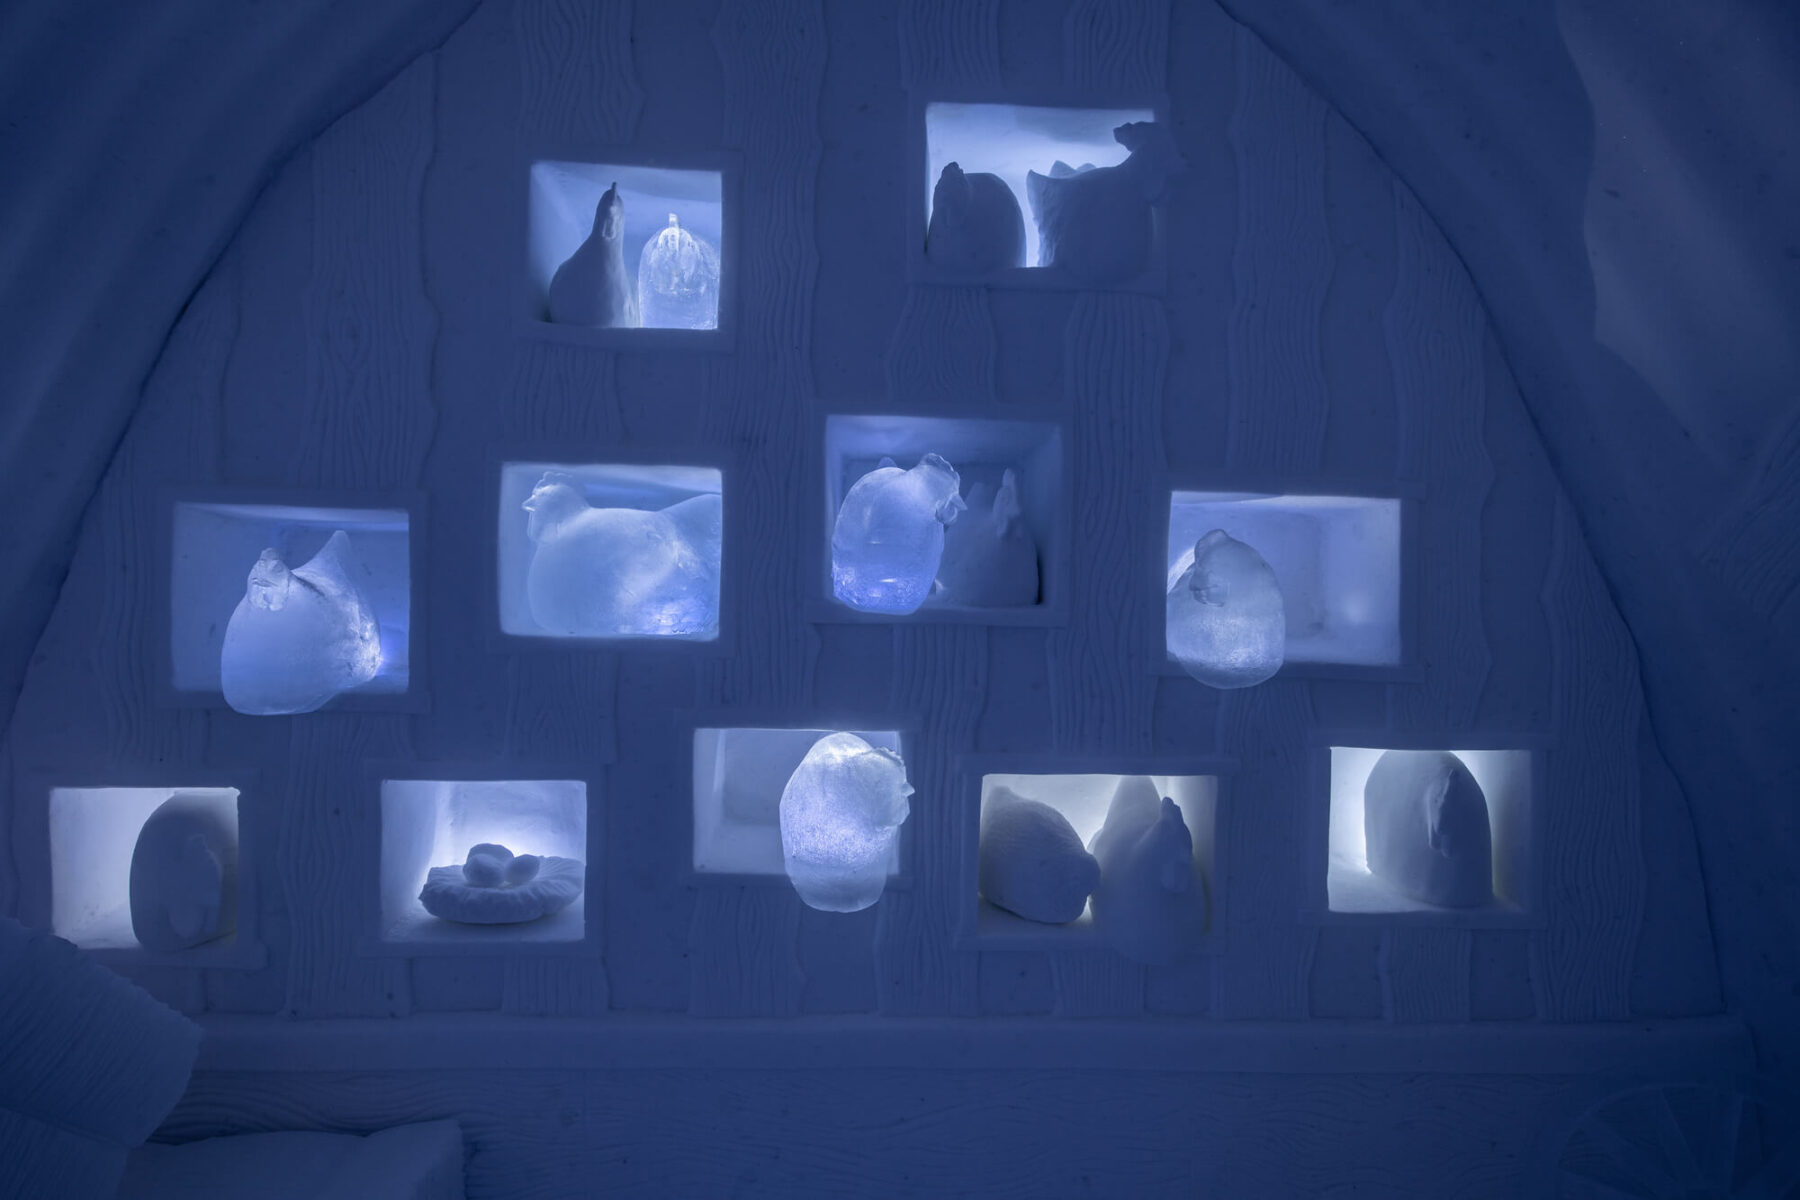 icehotel32 art suite to bed with the chickens by edith van de wetering and wilfred stijger ak